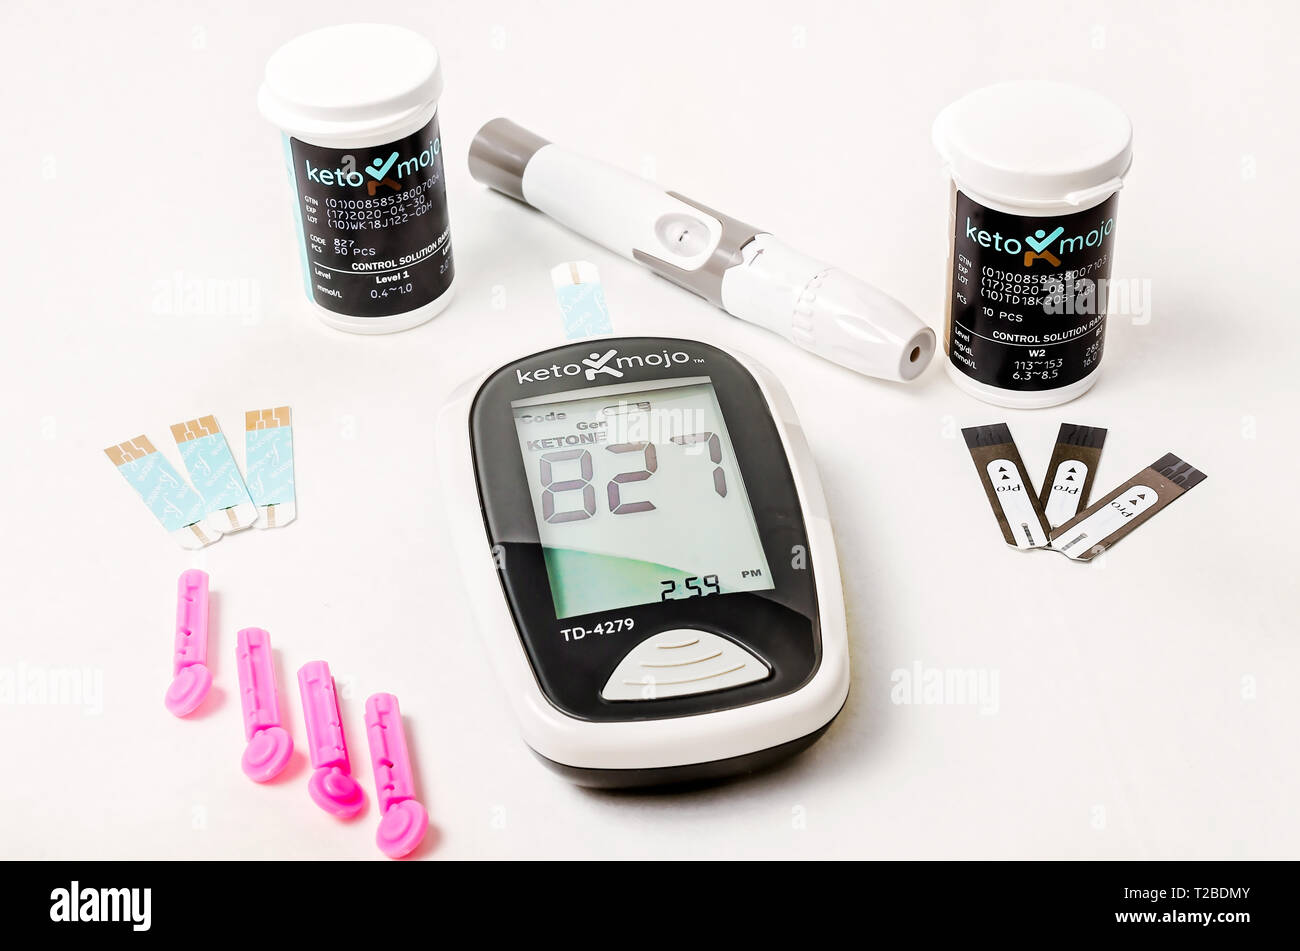 https://c8.alamy.com/comp/T2BDMY/a-keto-mojo-ketone-and-blood-glucose-meter-is-pictured-on-white-along-with-ketone-and-glucose-test-strips-disposable-needles-and-lancet-device-T2BDMY.jpg